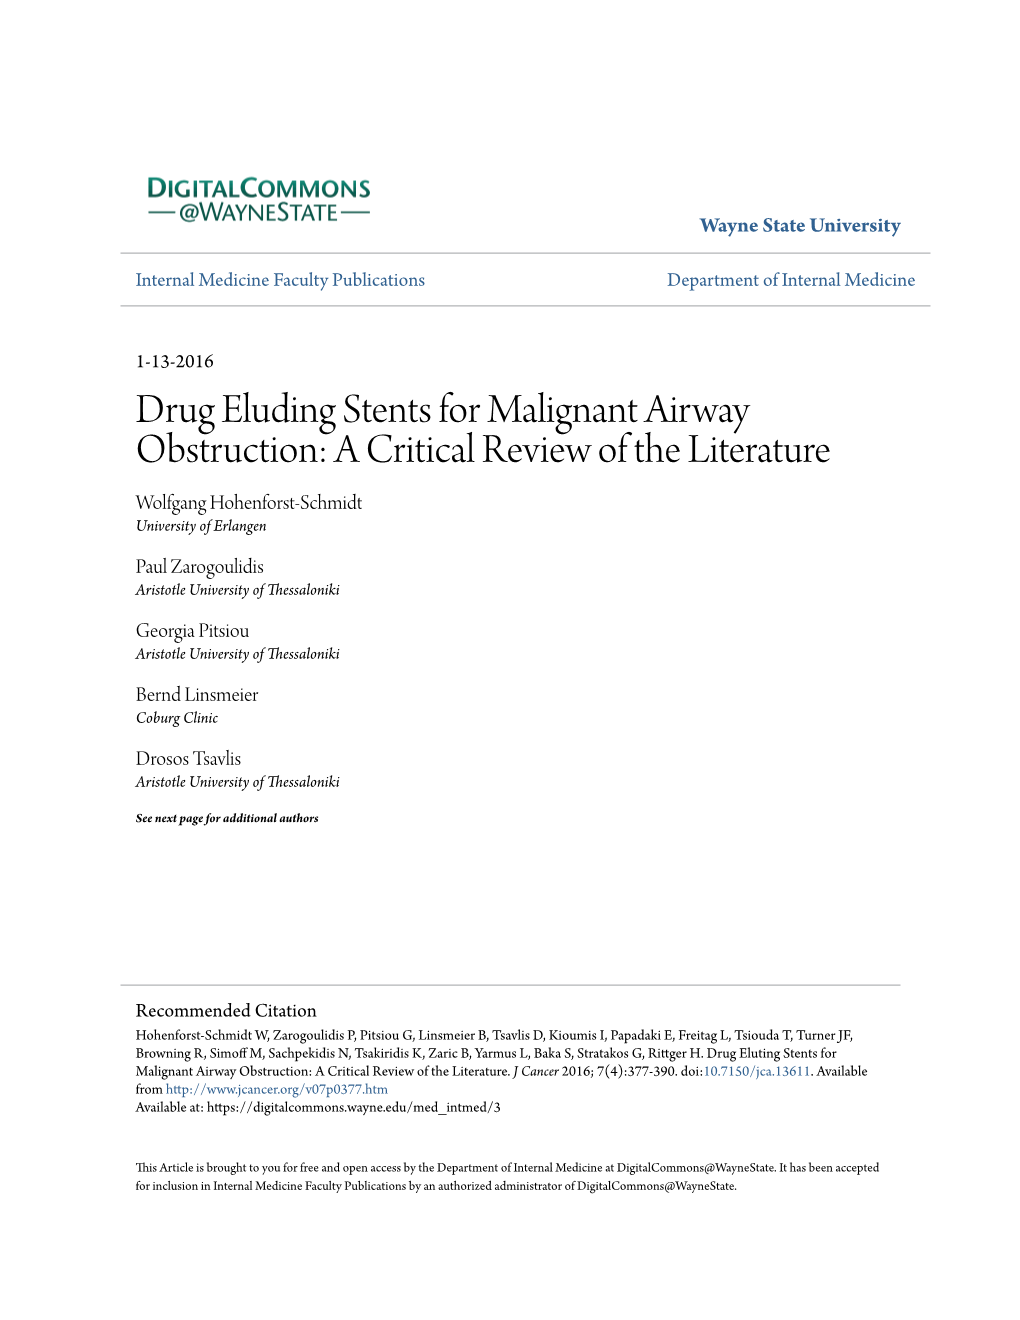 Drug Eluding Stents for Malignant Airway Obstruction: a Critical Review of the Literature Wolfgang Hohenforst-Schmidt University of Erlangen